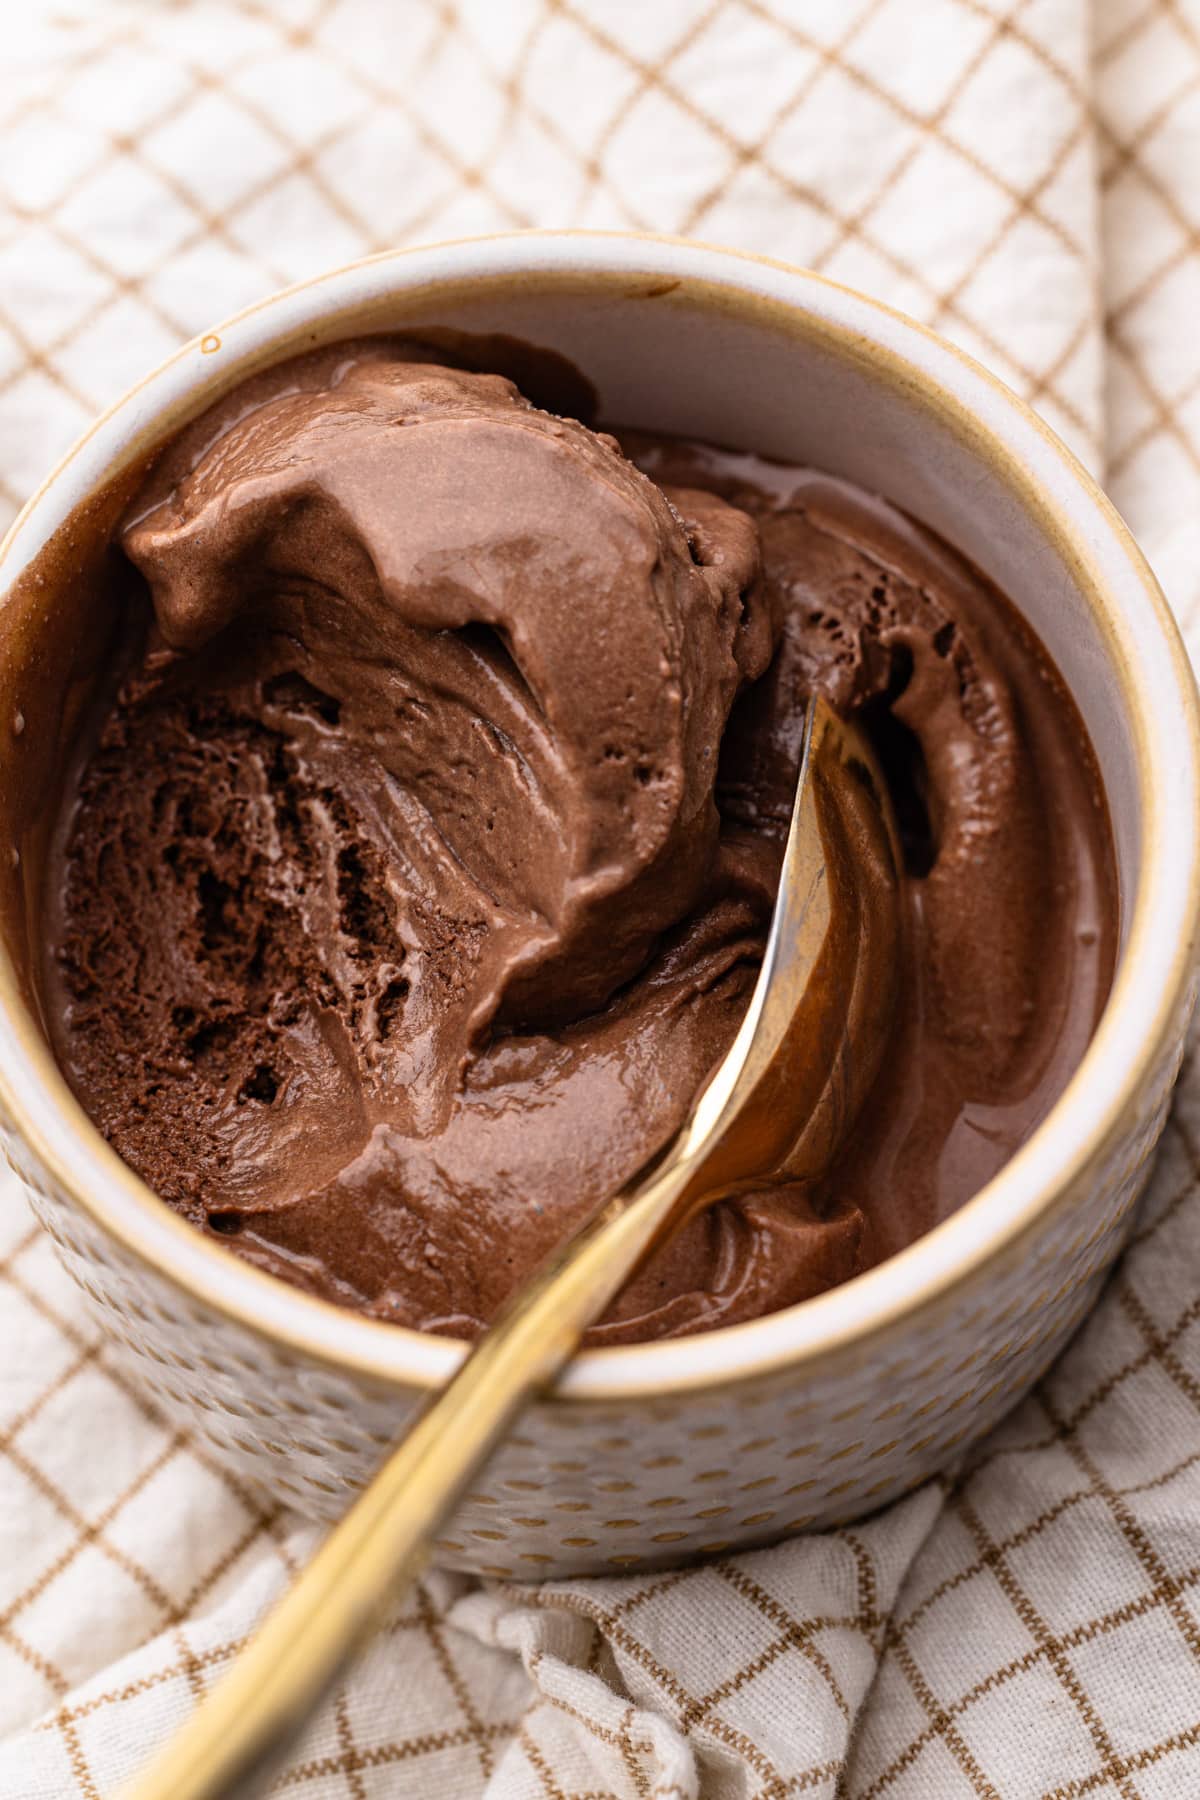 A bowl of chocolate ice cream with a scoop taken out.